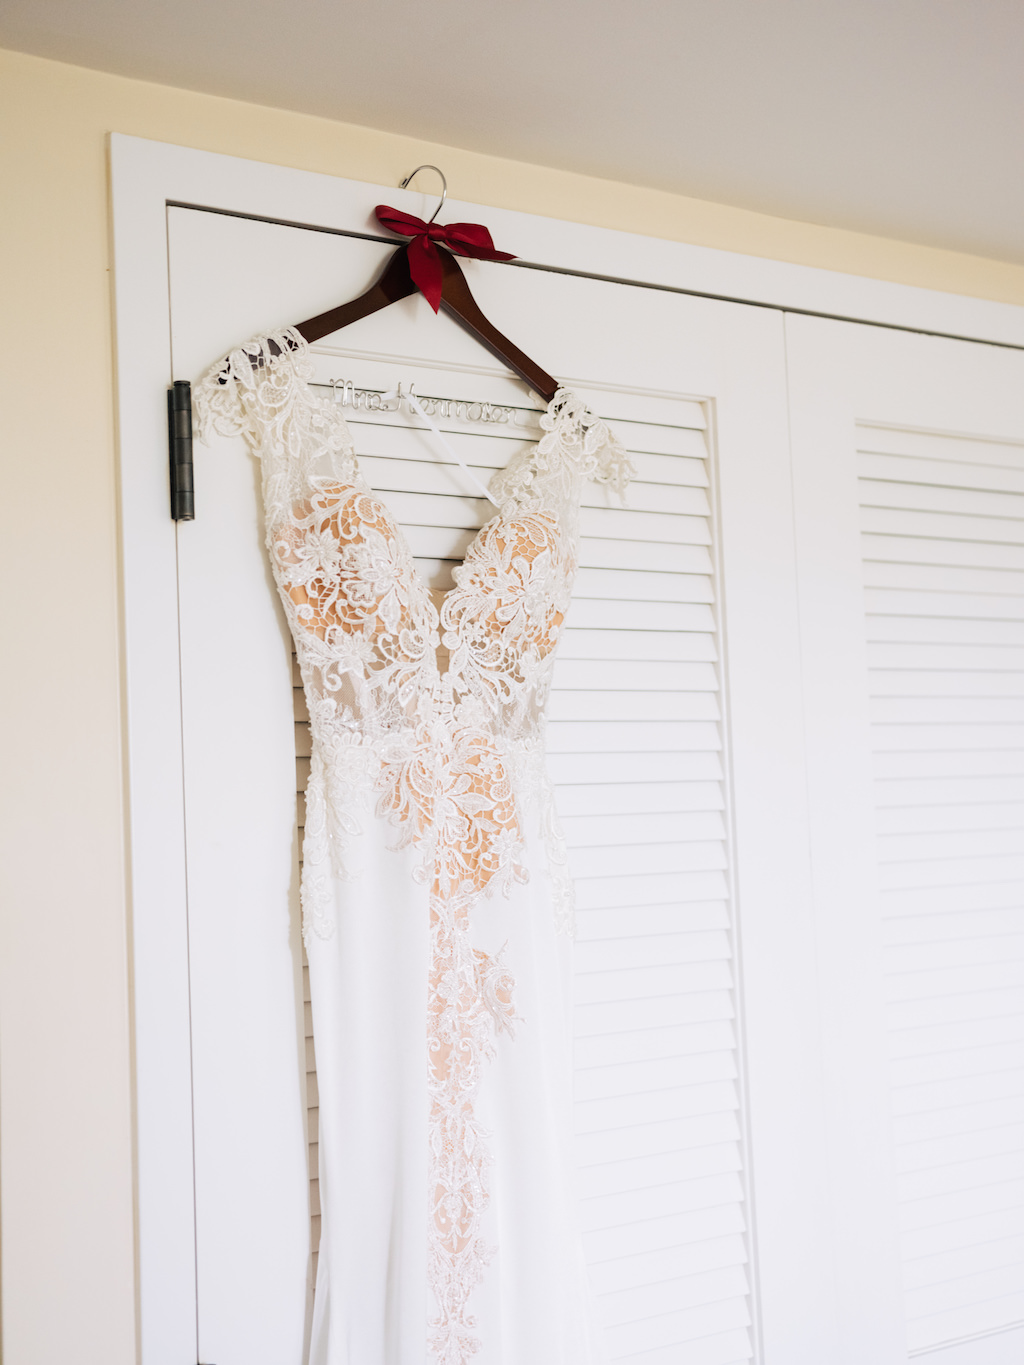 White Lace Bodice Cap Sleeve and Deep V Neck Fitted Wedding Dress with Nude Lining on Custom Personalized Wooden Hanger